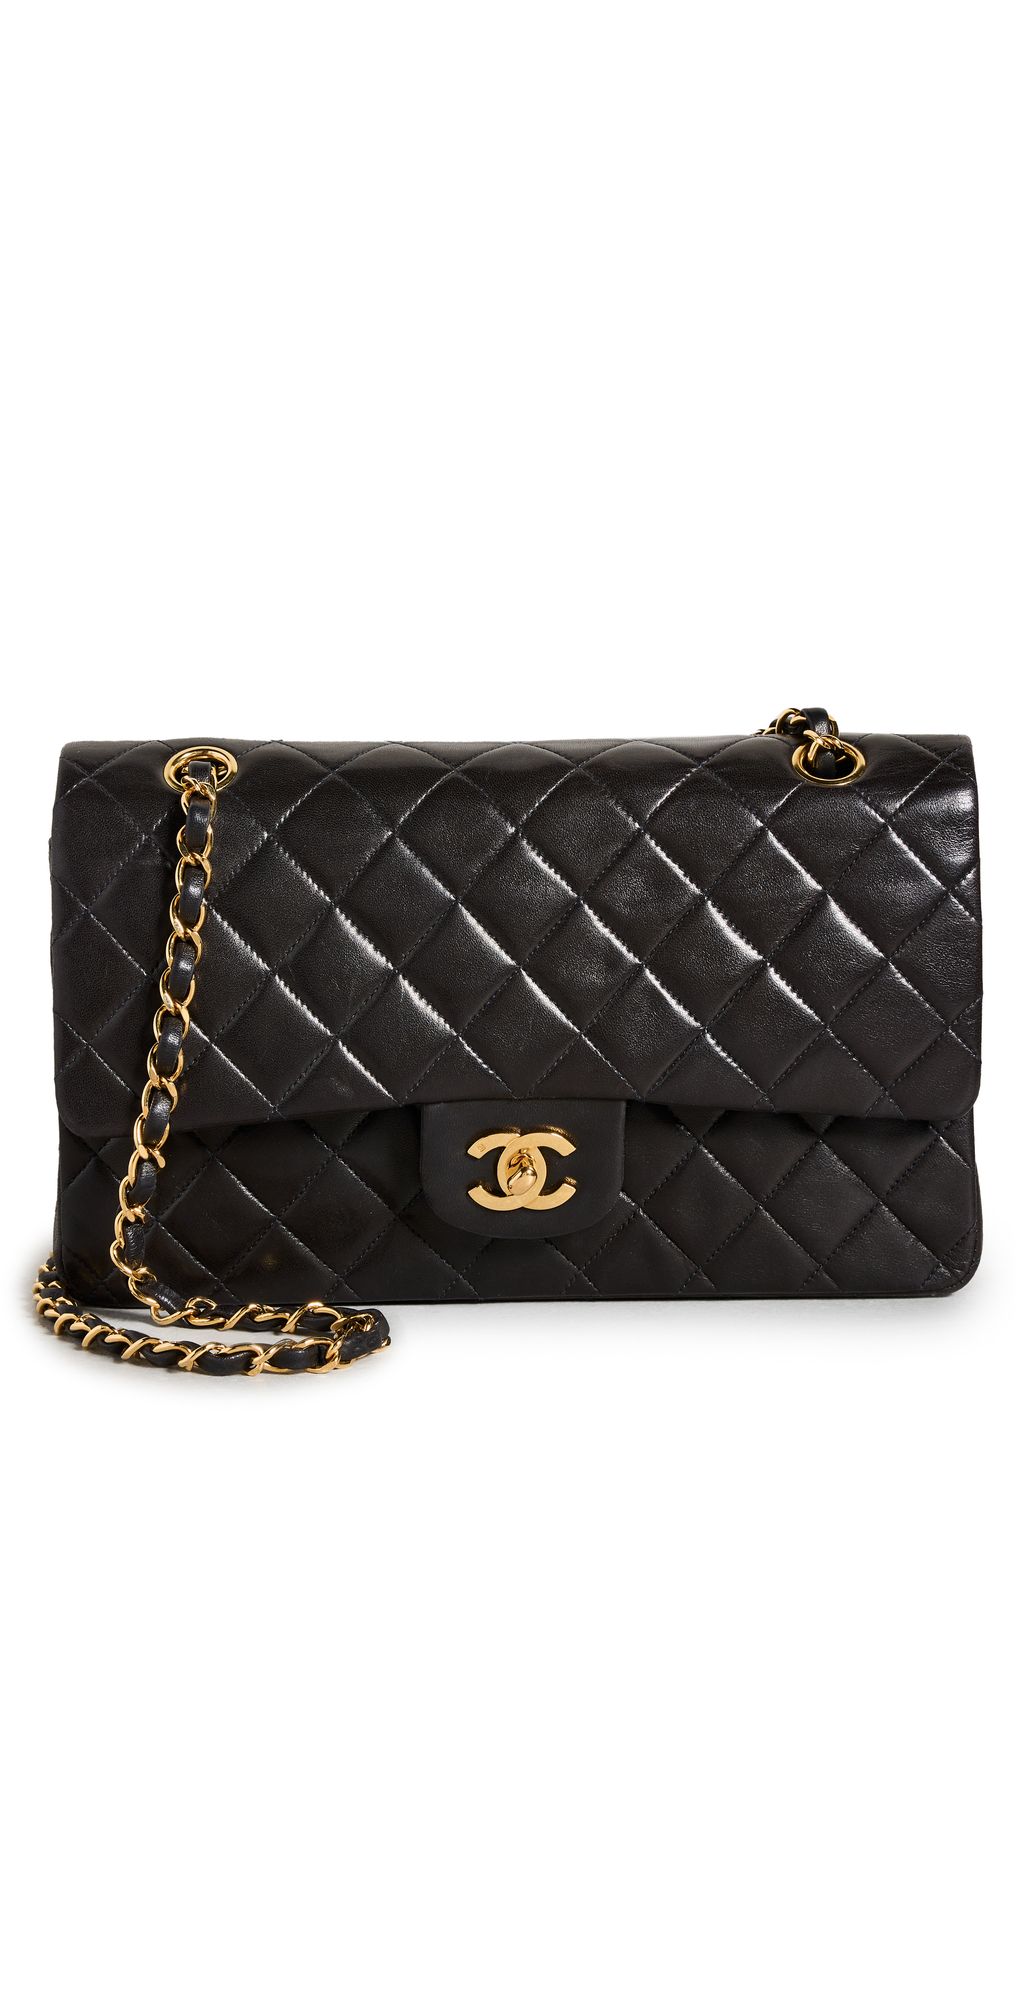 What Goes Around Comes Around Chanel Black Lambskin Flap Bag | Shopbop